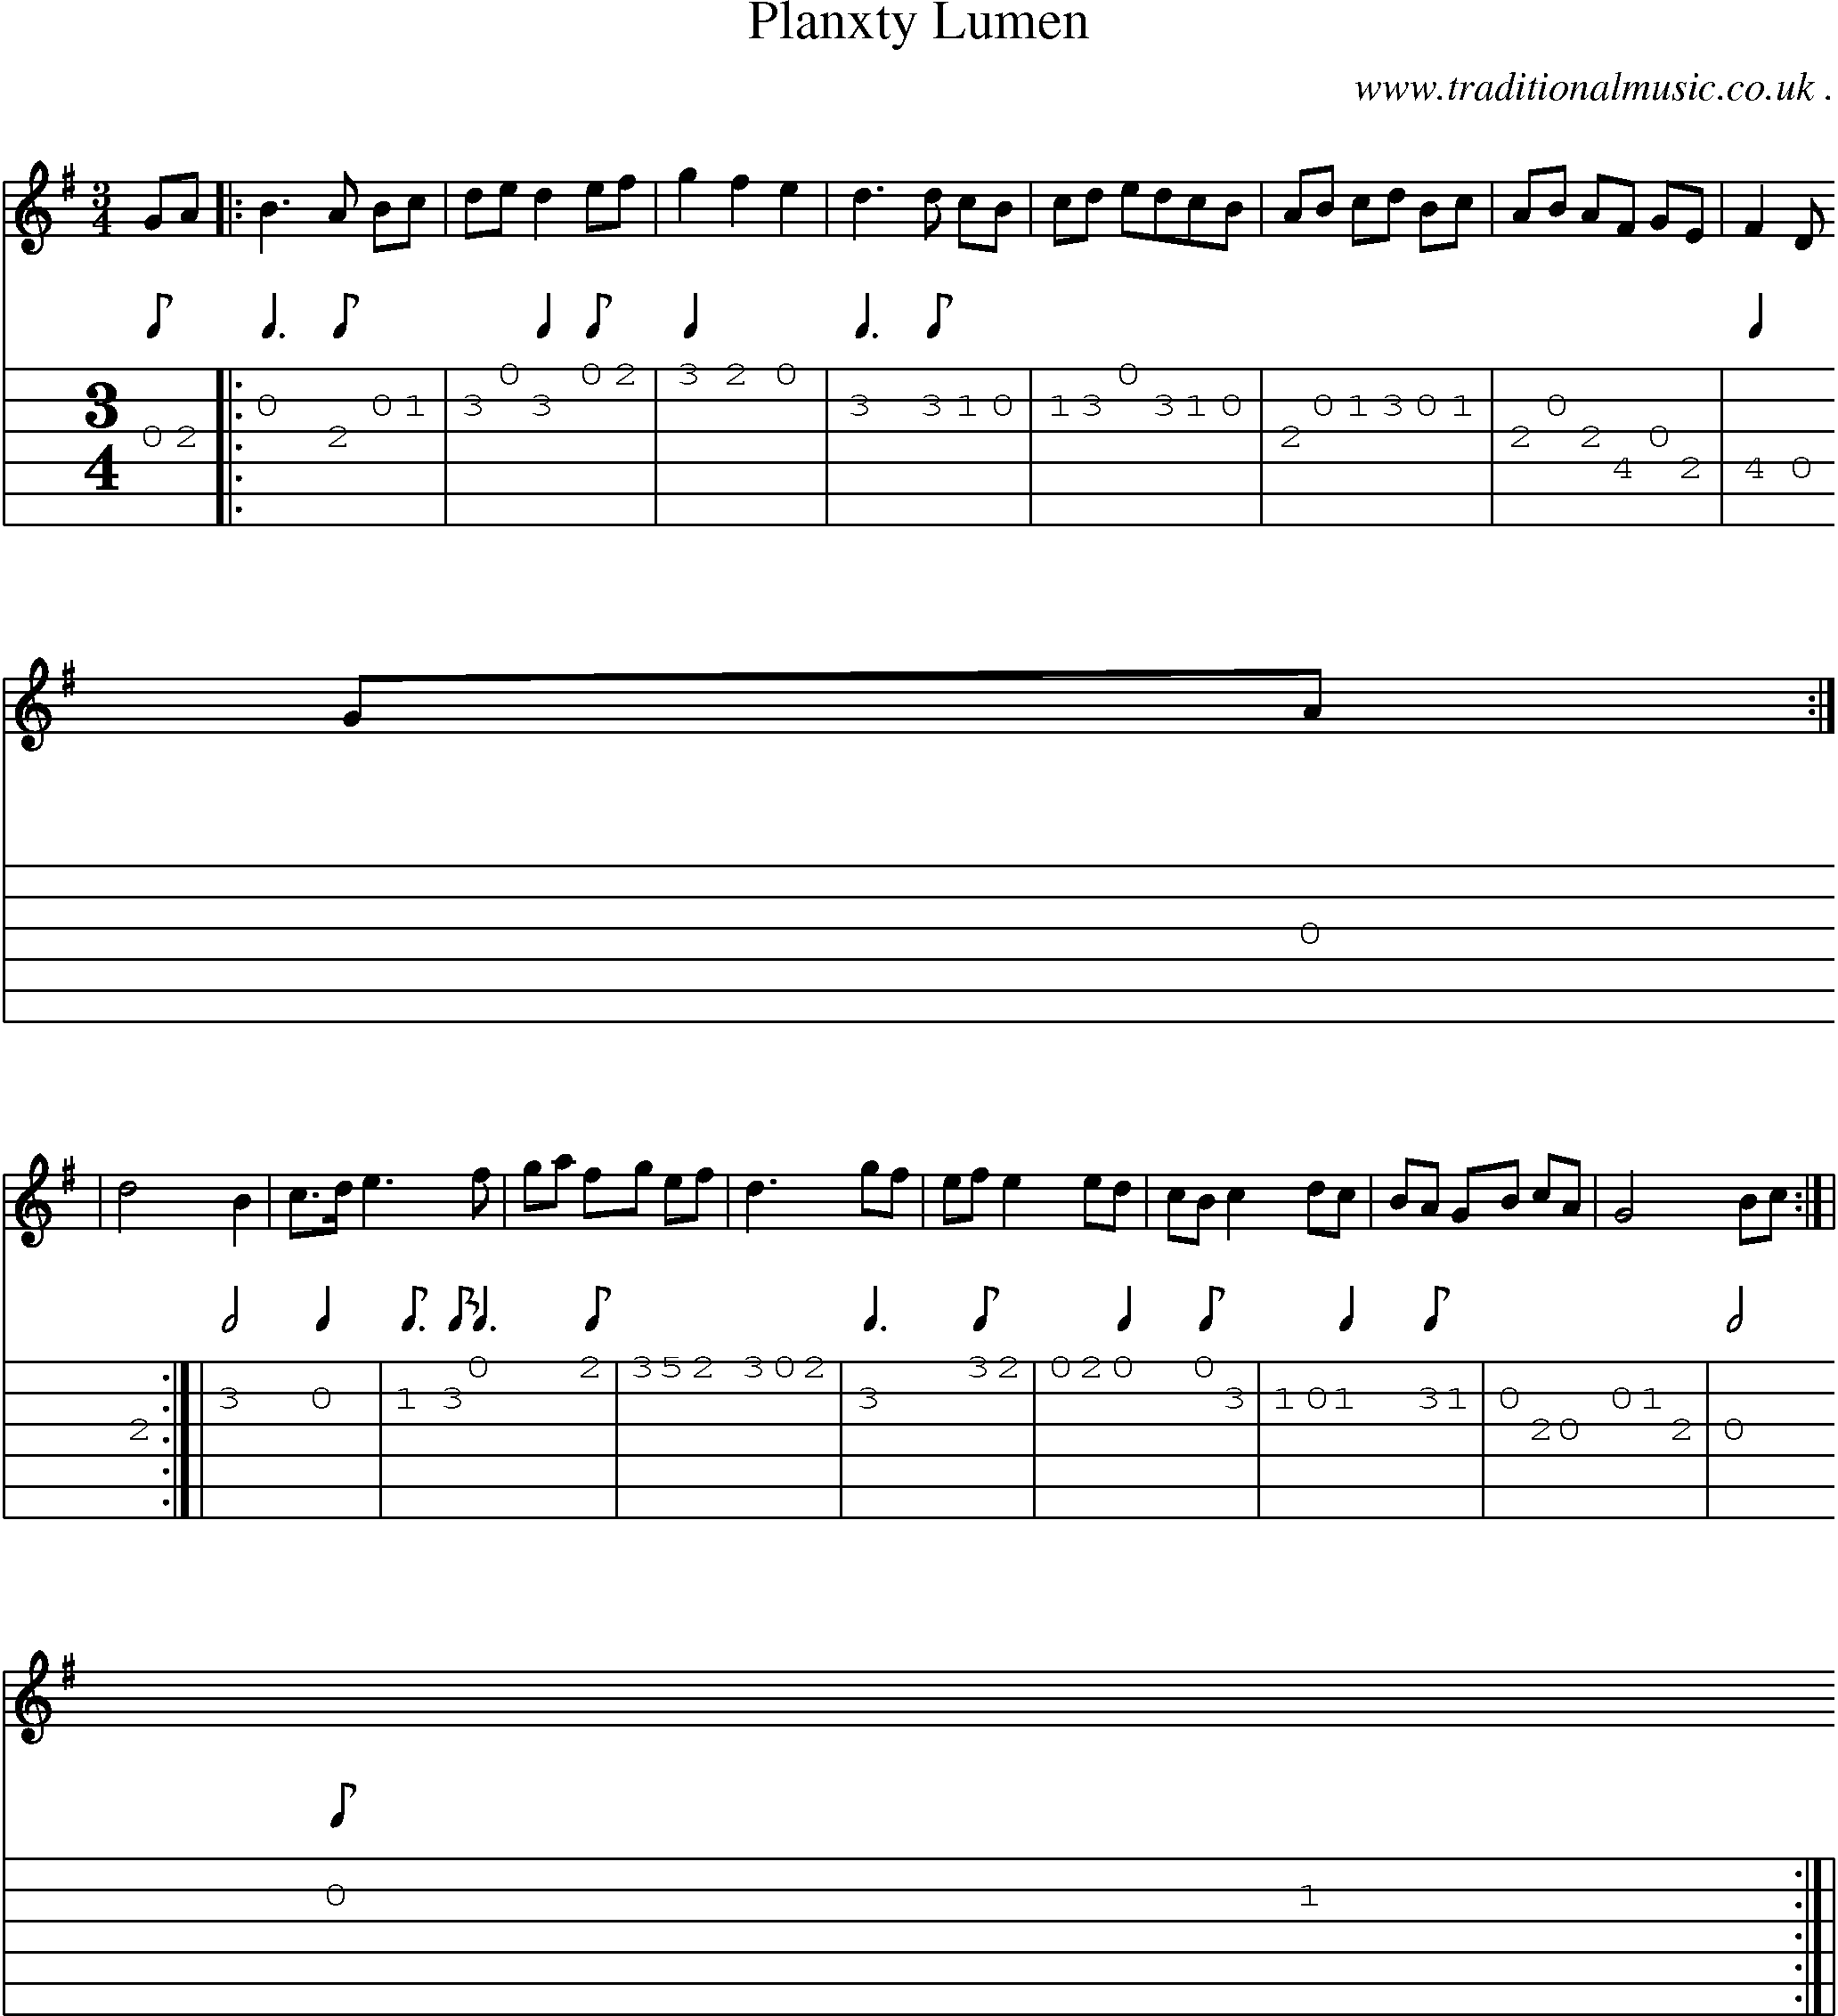 Sheet-Music and Guitar Tabs for Planxty Lumen